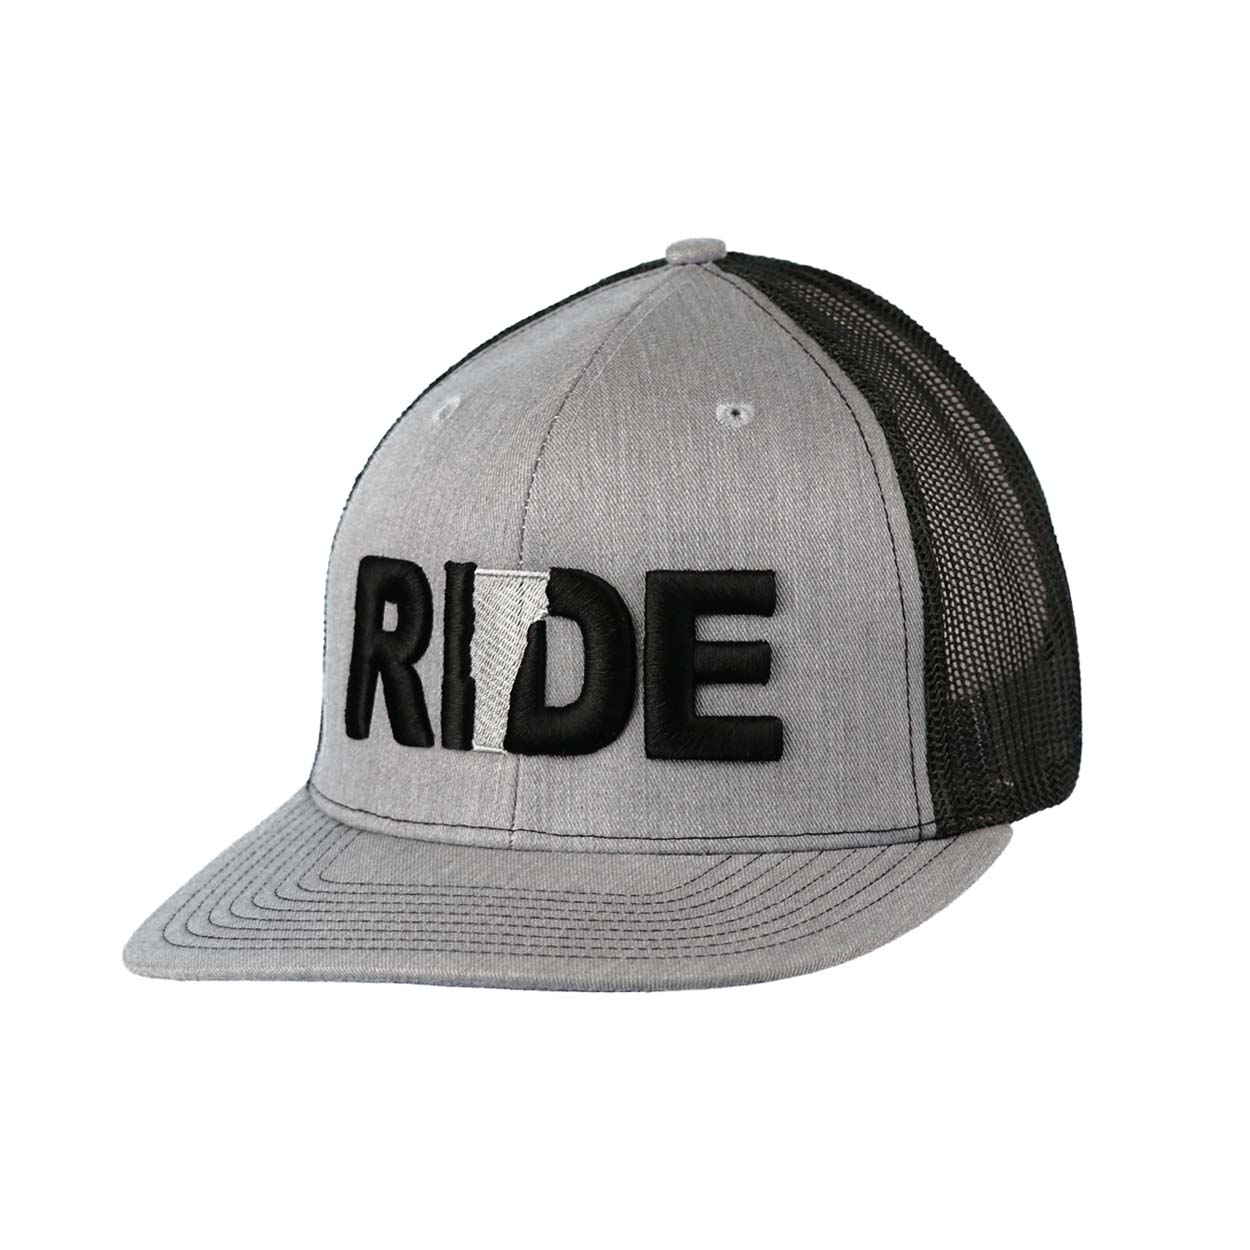 Ride Vermont Classic Embroidered Snapback Trucker Hat Heather Gray/Black